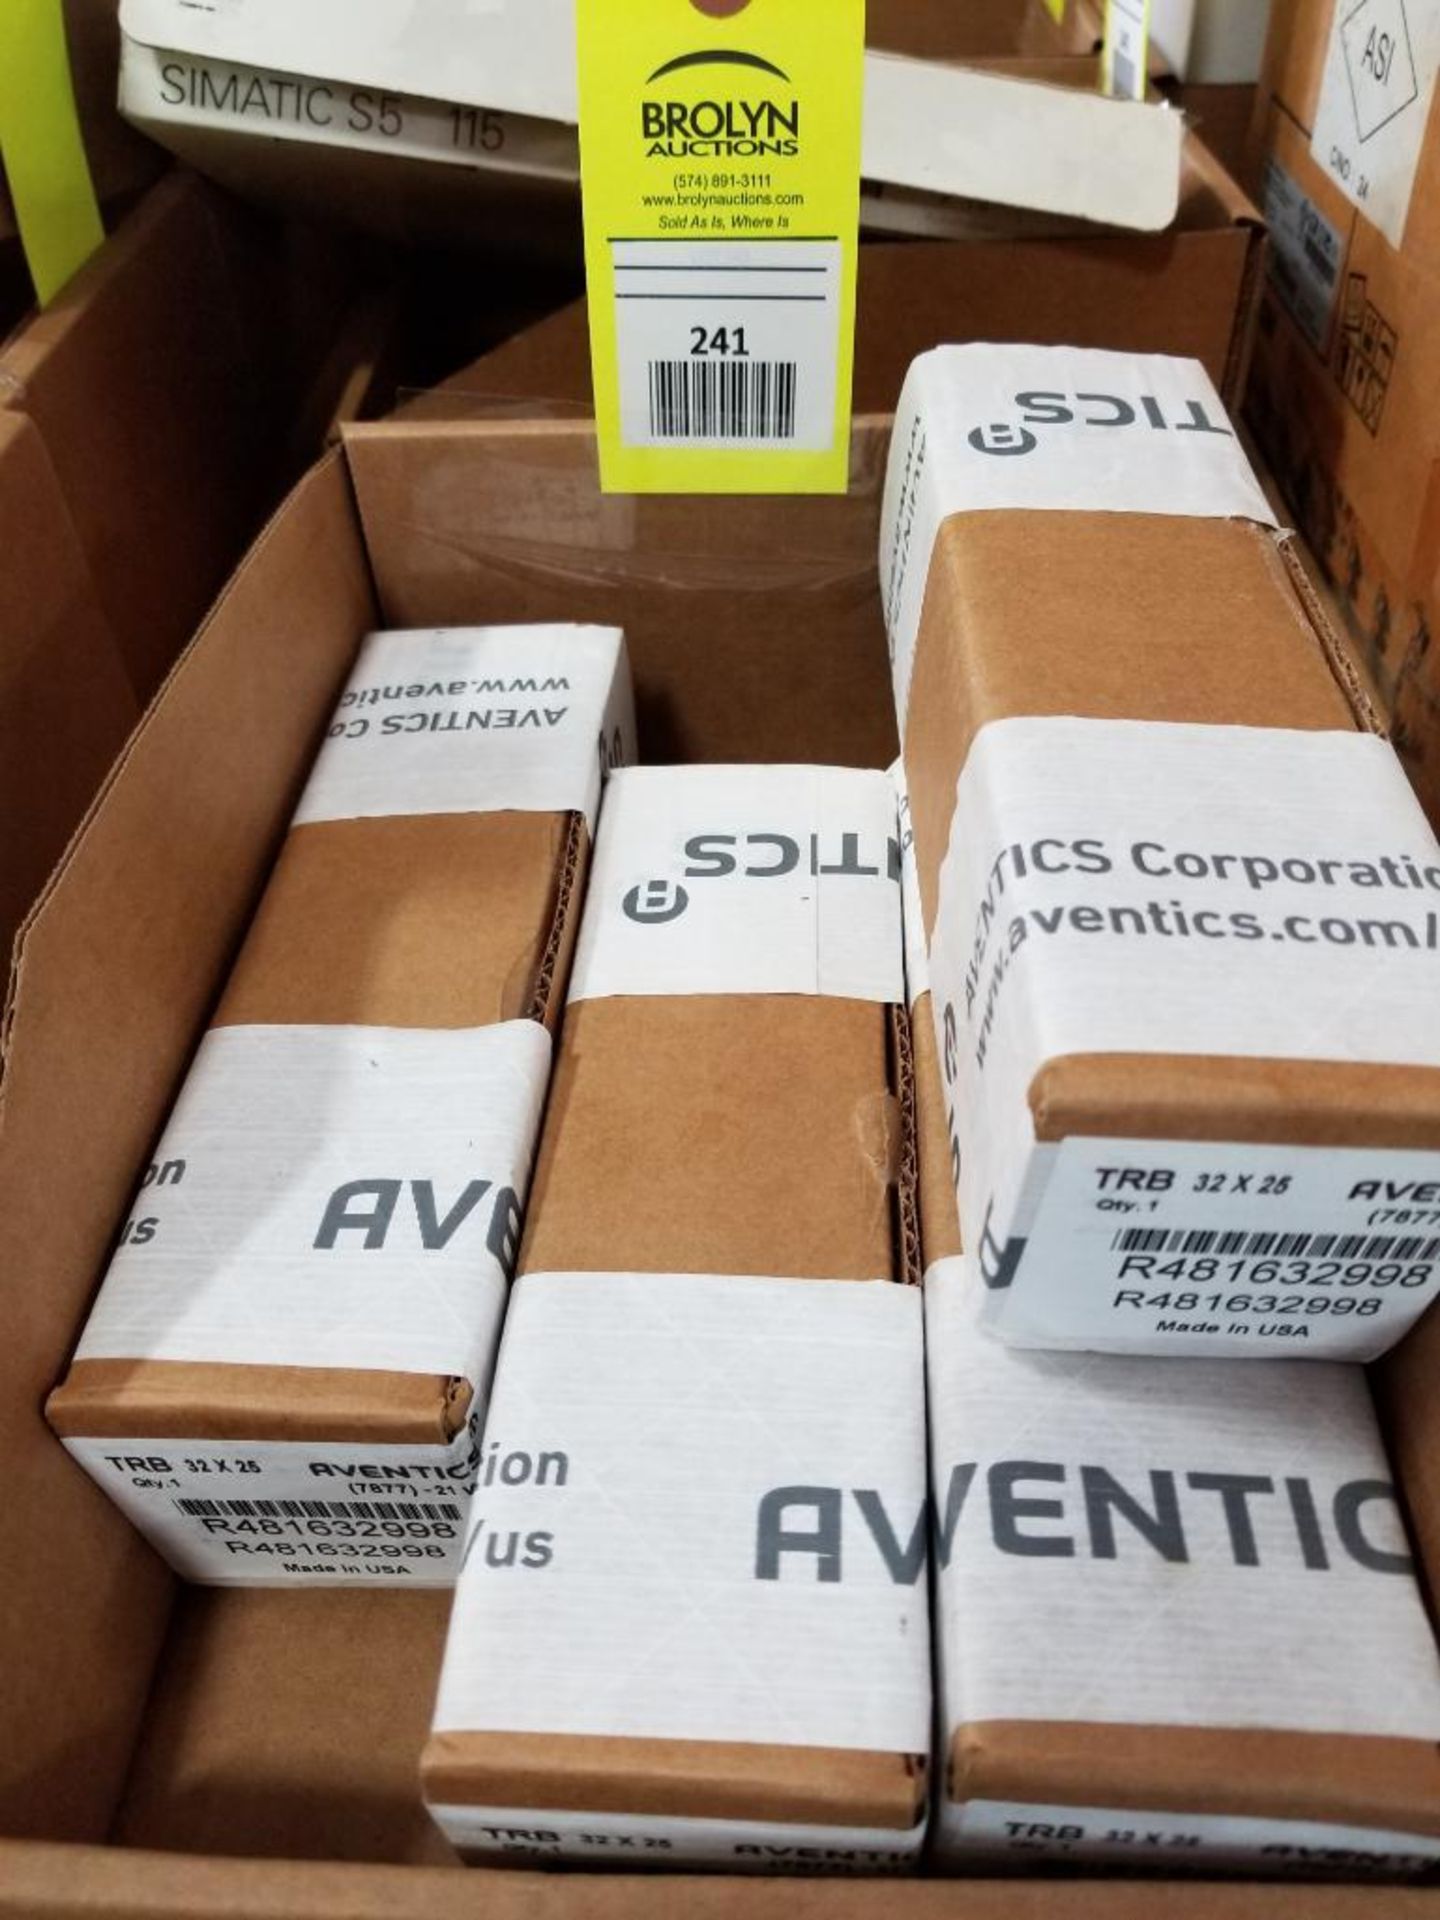 Qty 4 - Aventics. Part number R481632998. New in box.